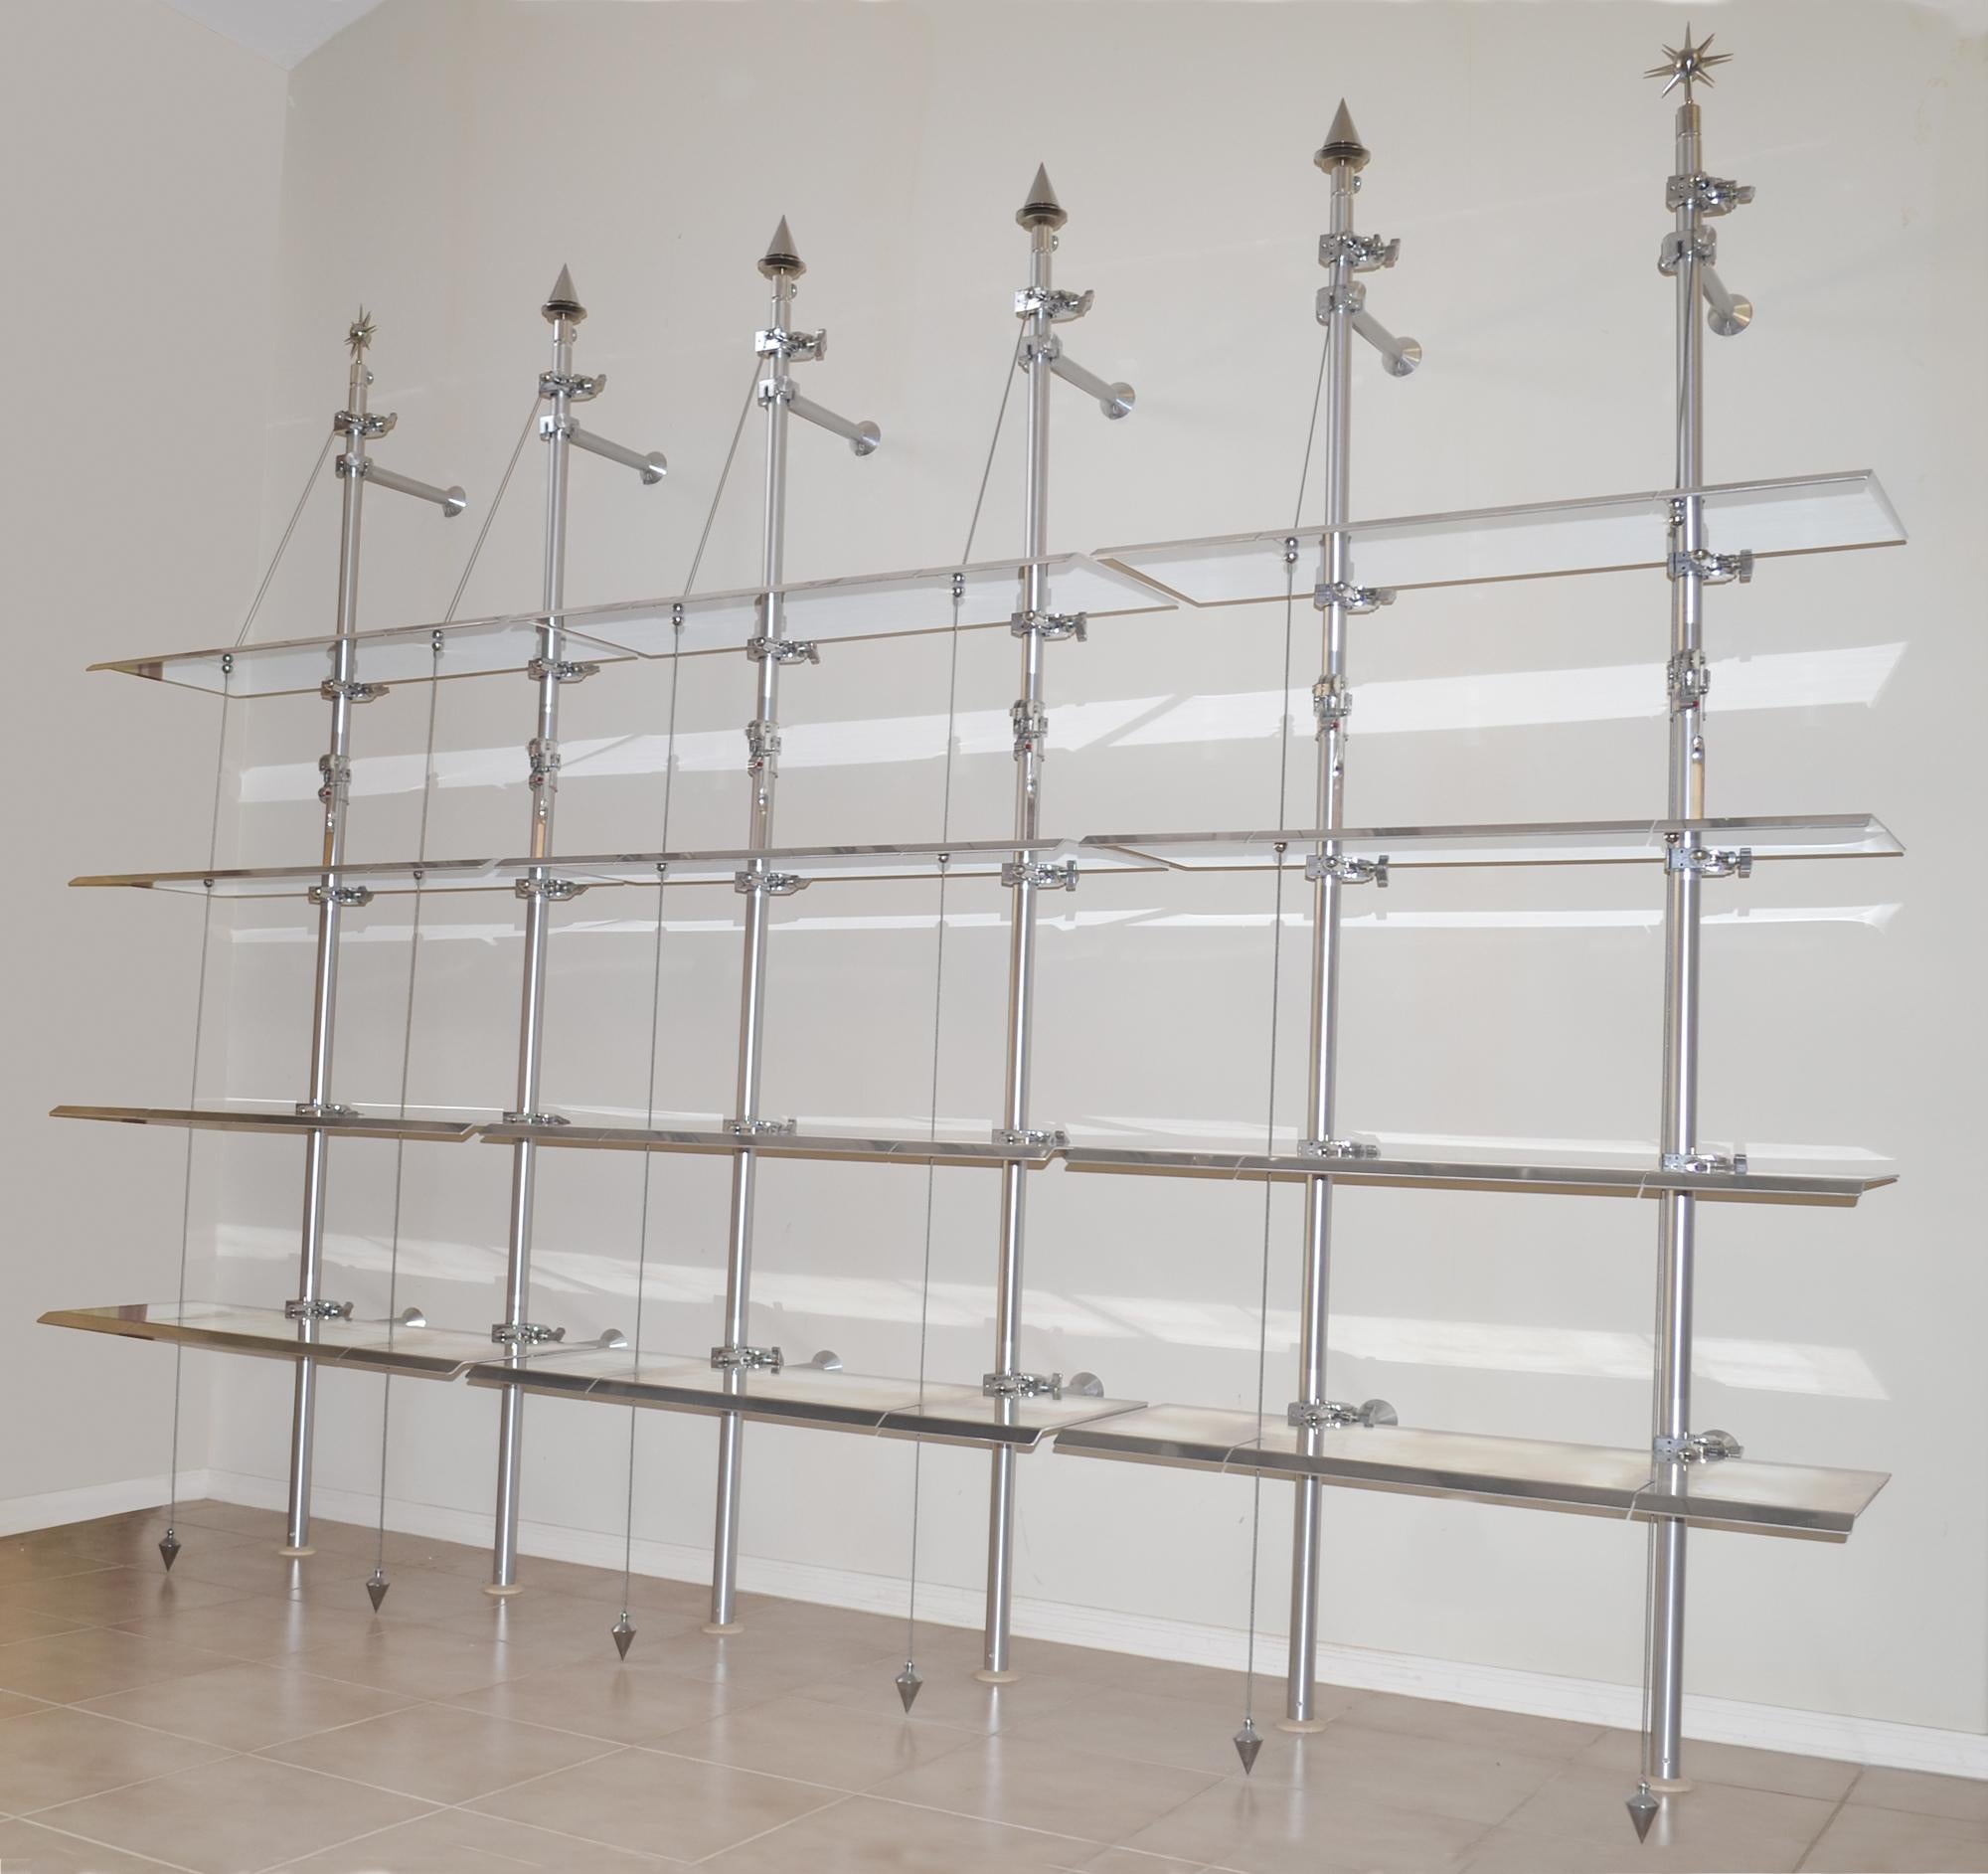 Rare 1980s ALU Manfrotto Modular Bookcase Shelf System Wall Unit or Display

An amazing one-off 1980s modular shelf system / wall unit / retail display, by ALU, Italy, consisting of six poles and twelve shelves constructed of precision machined